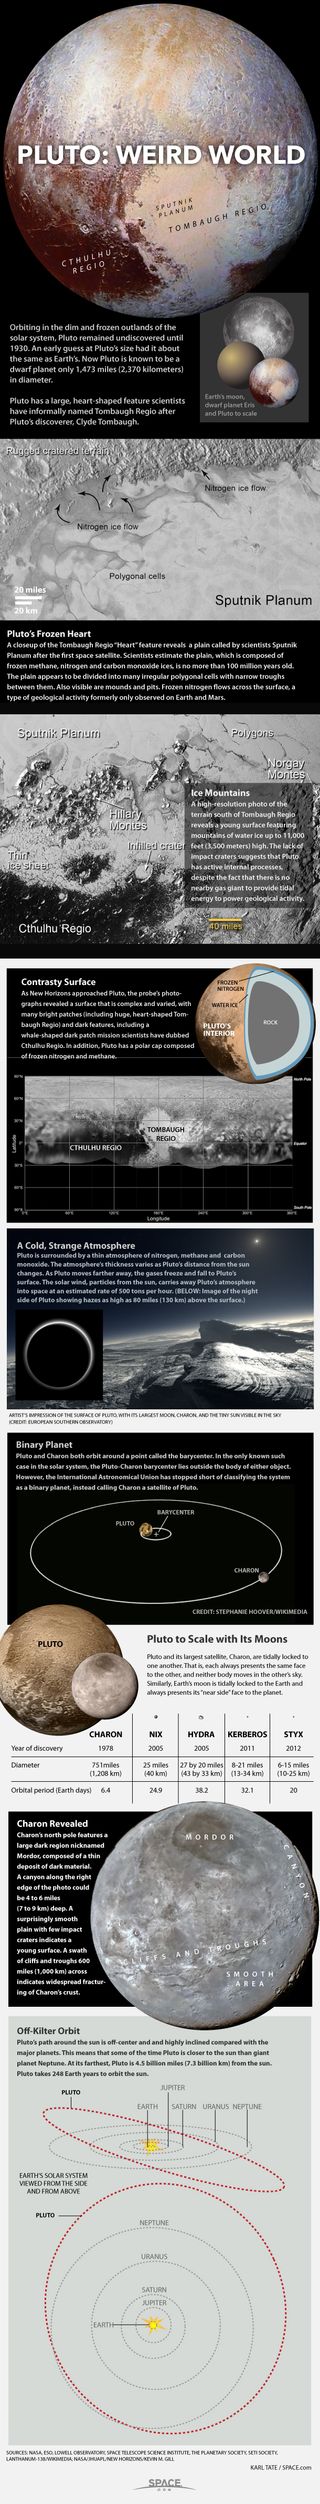 Pluto and its moons orbit the sun near the edge of our solar system. Learn all about Pluto's weirdly eccentric orbit, four moons and more in this Space.com infographic.